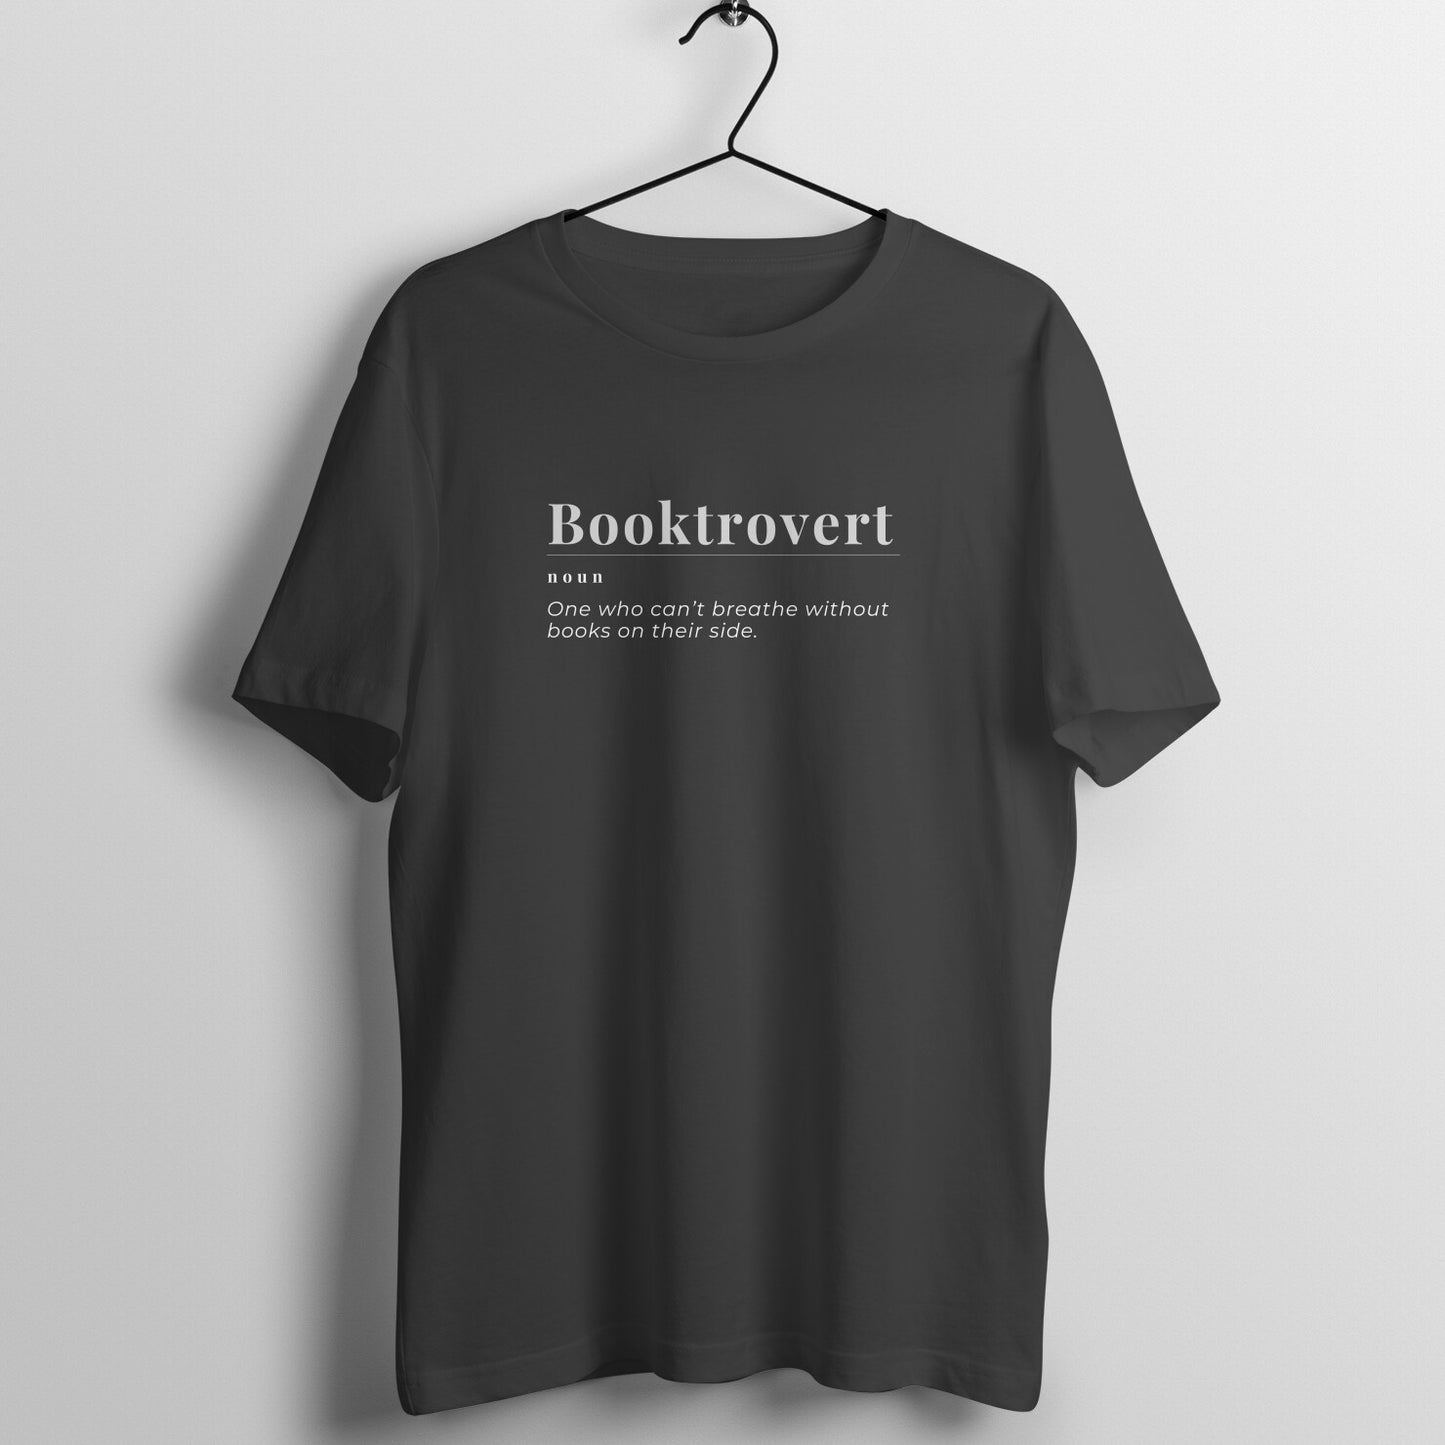 Booktrovert Tshirt for Book Lovers